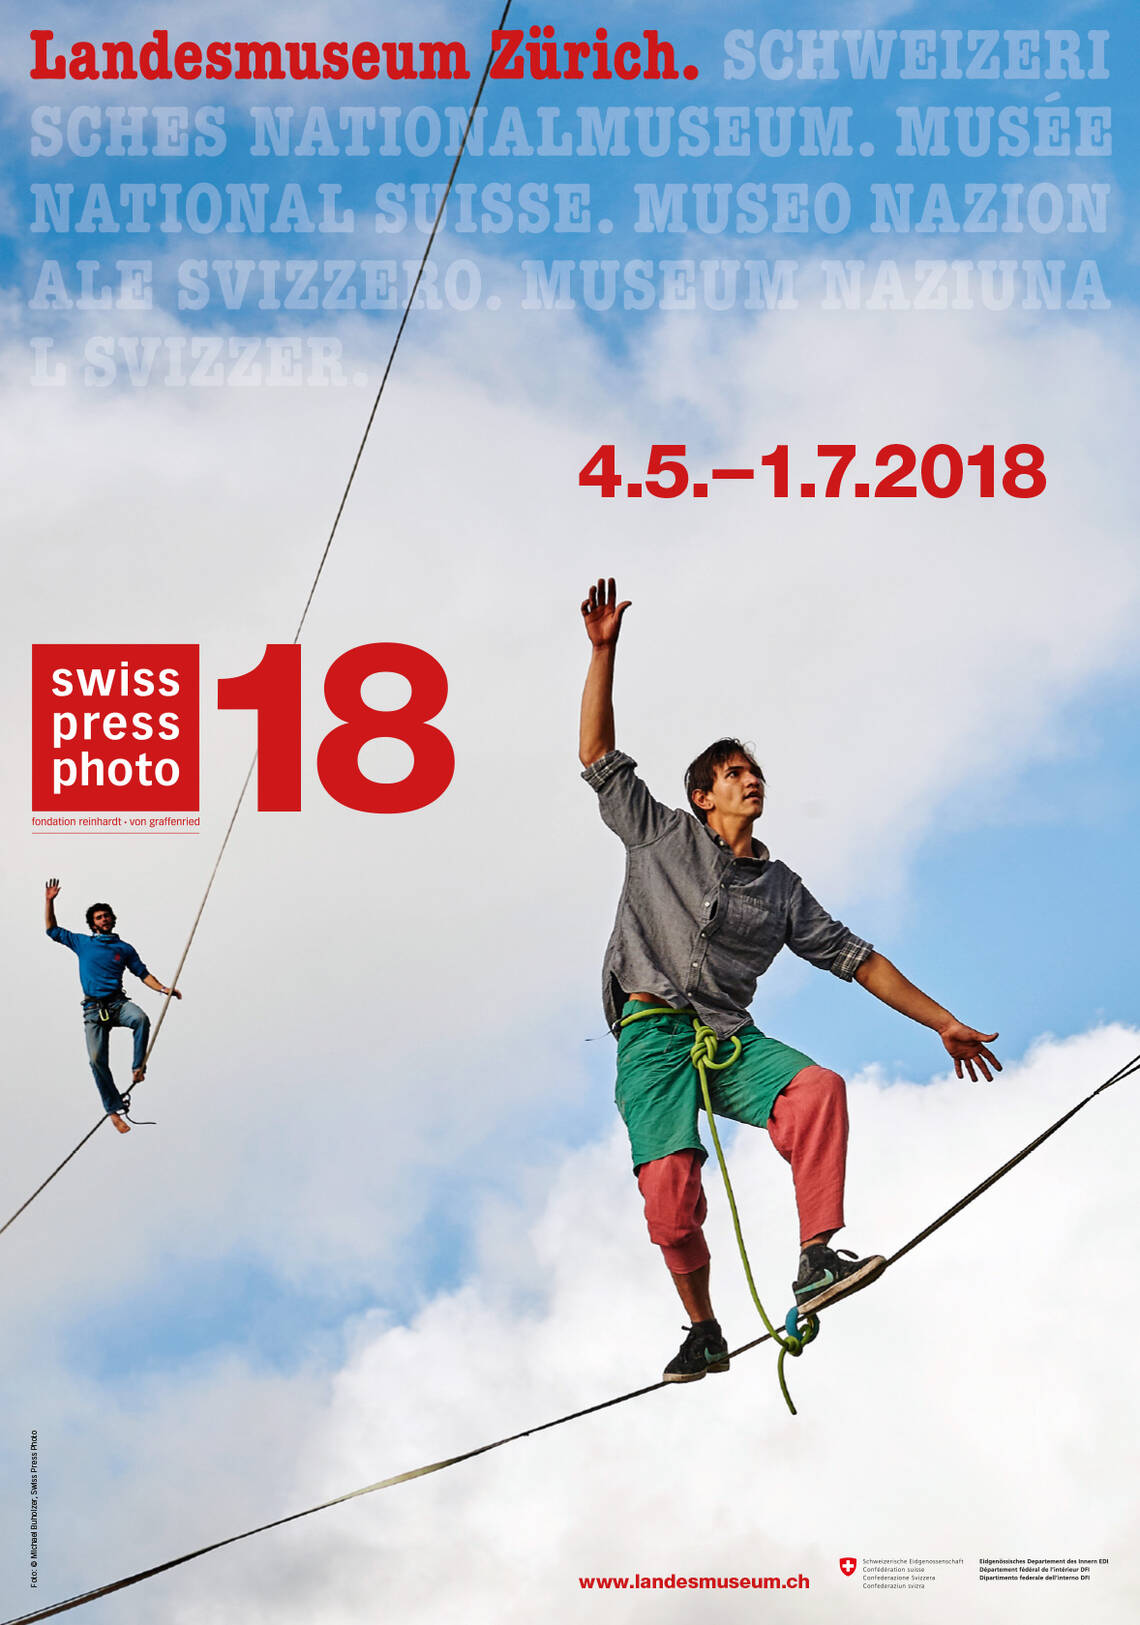 Poster of the "Swiss Press Photo 18" exhibition